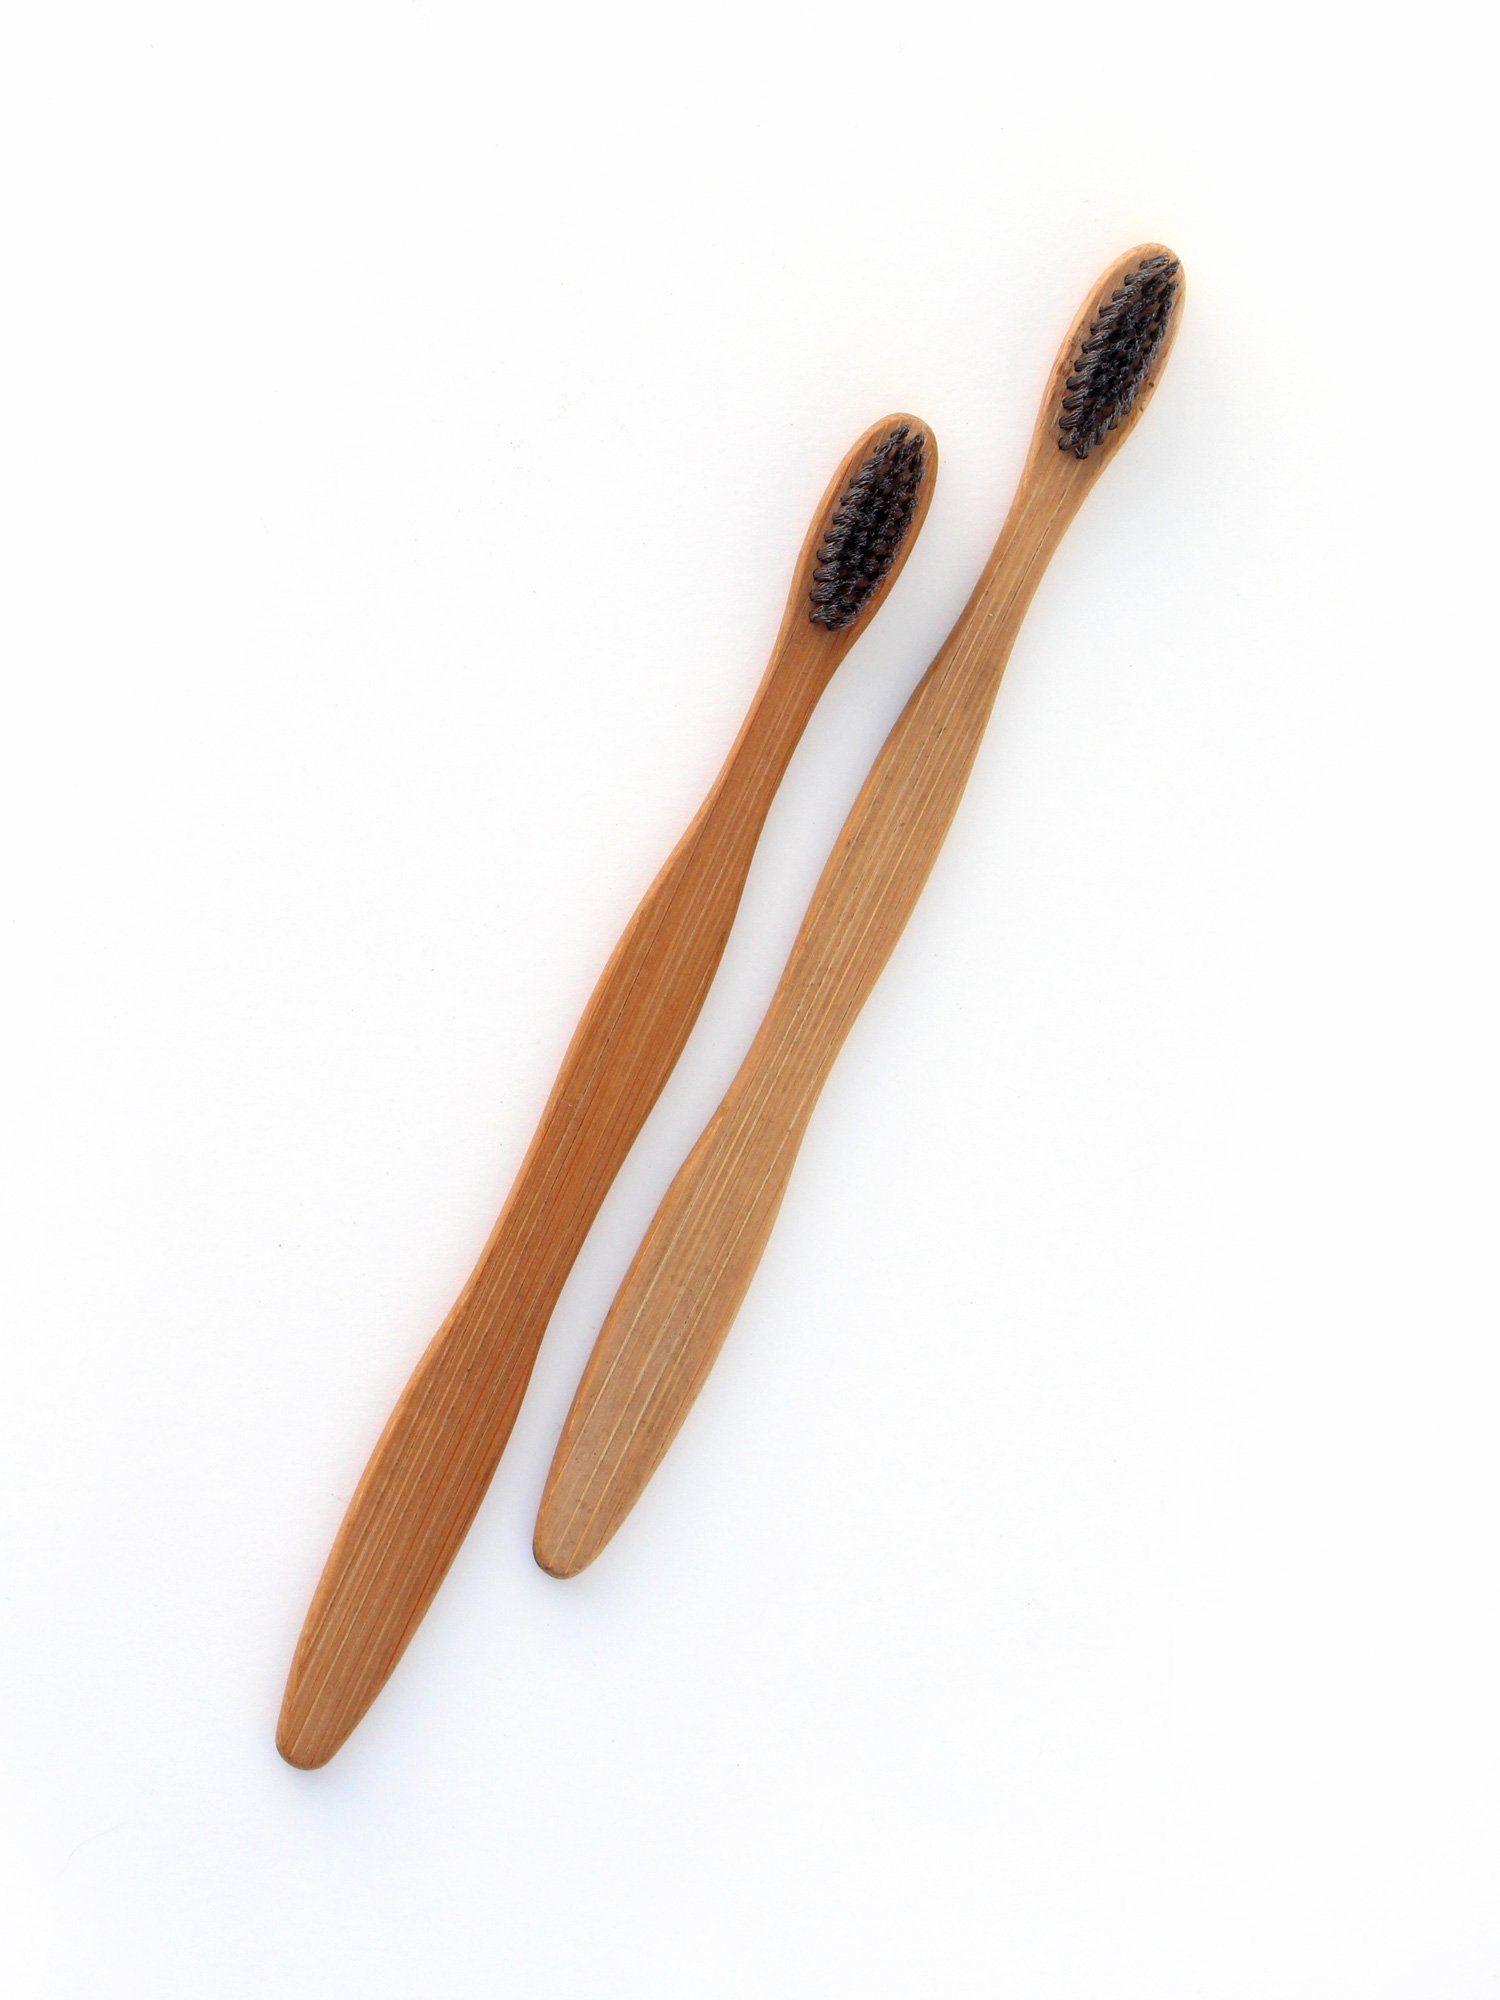 Two Bamboo toothbrush, Curve Shaped with Charcoal Bristles